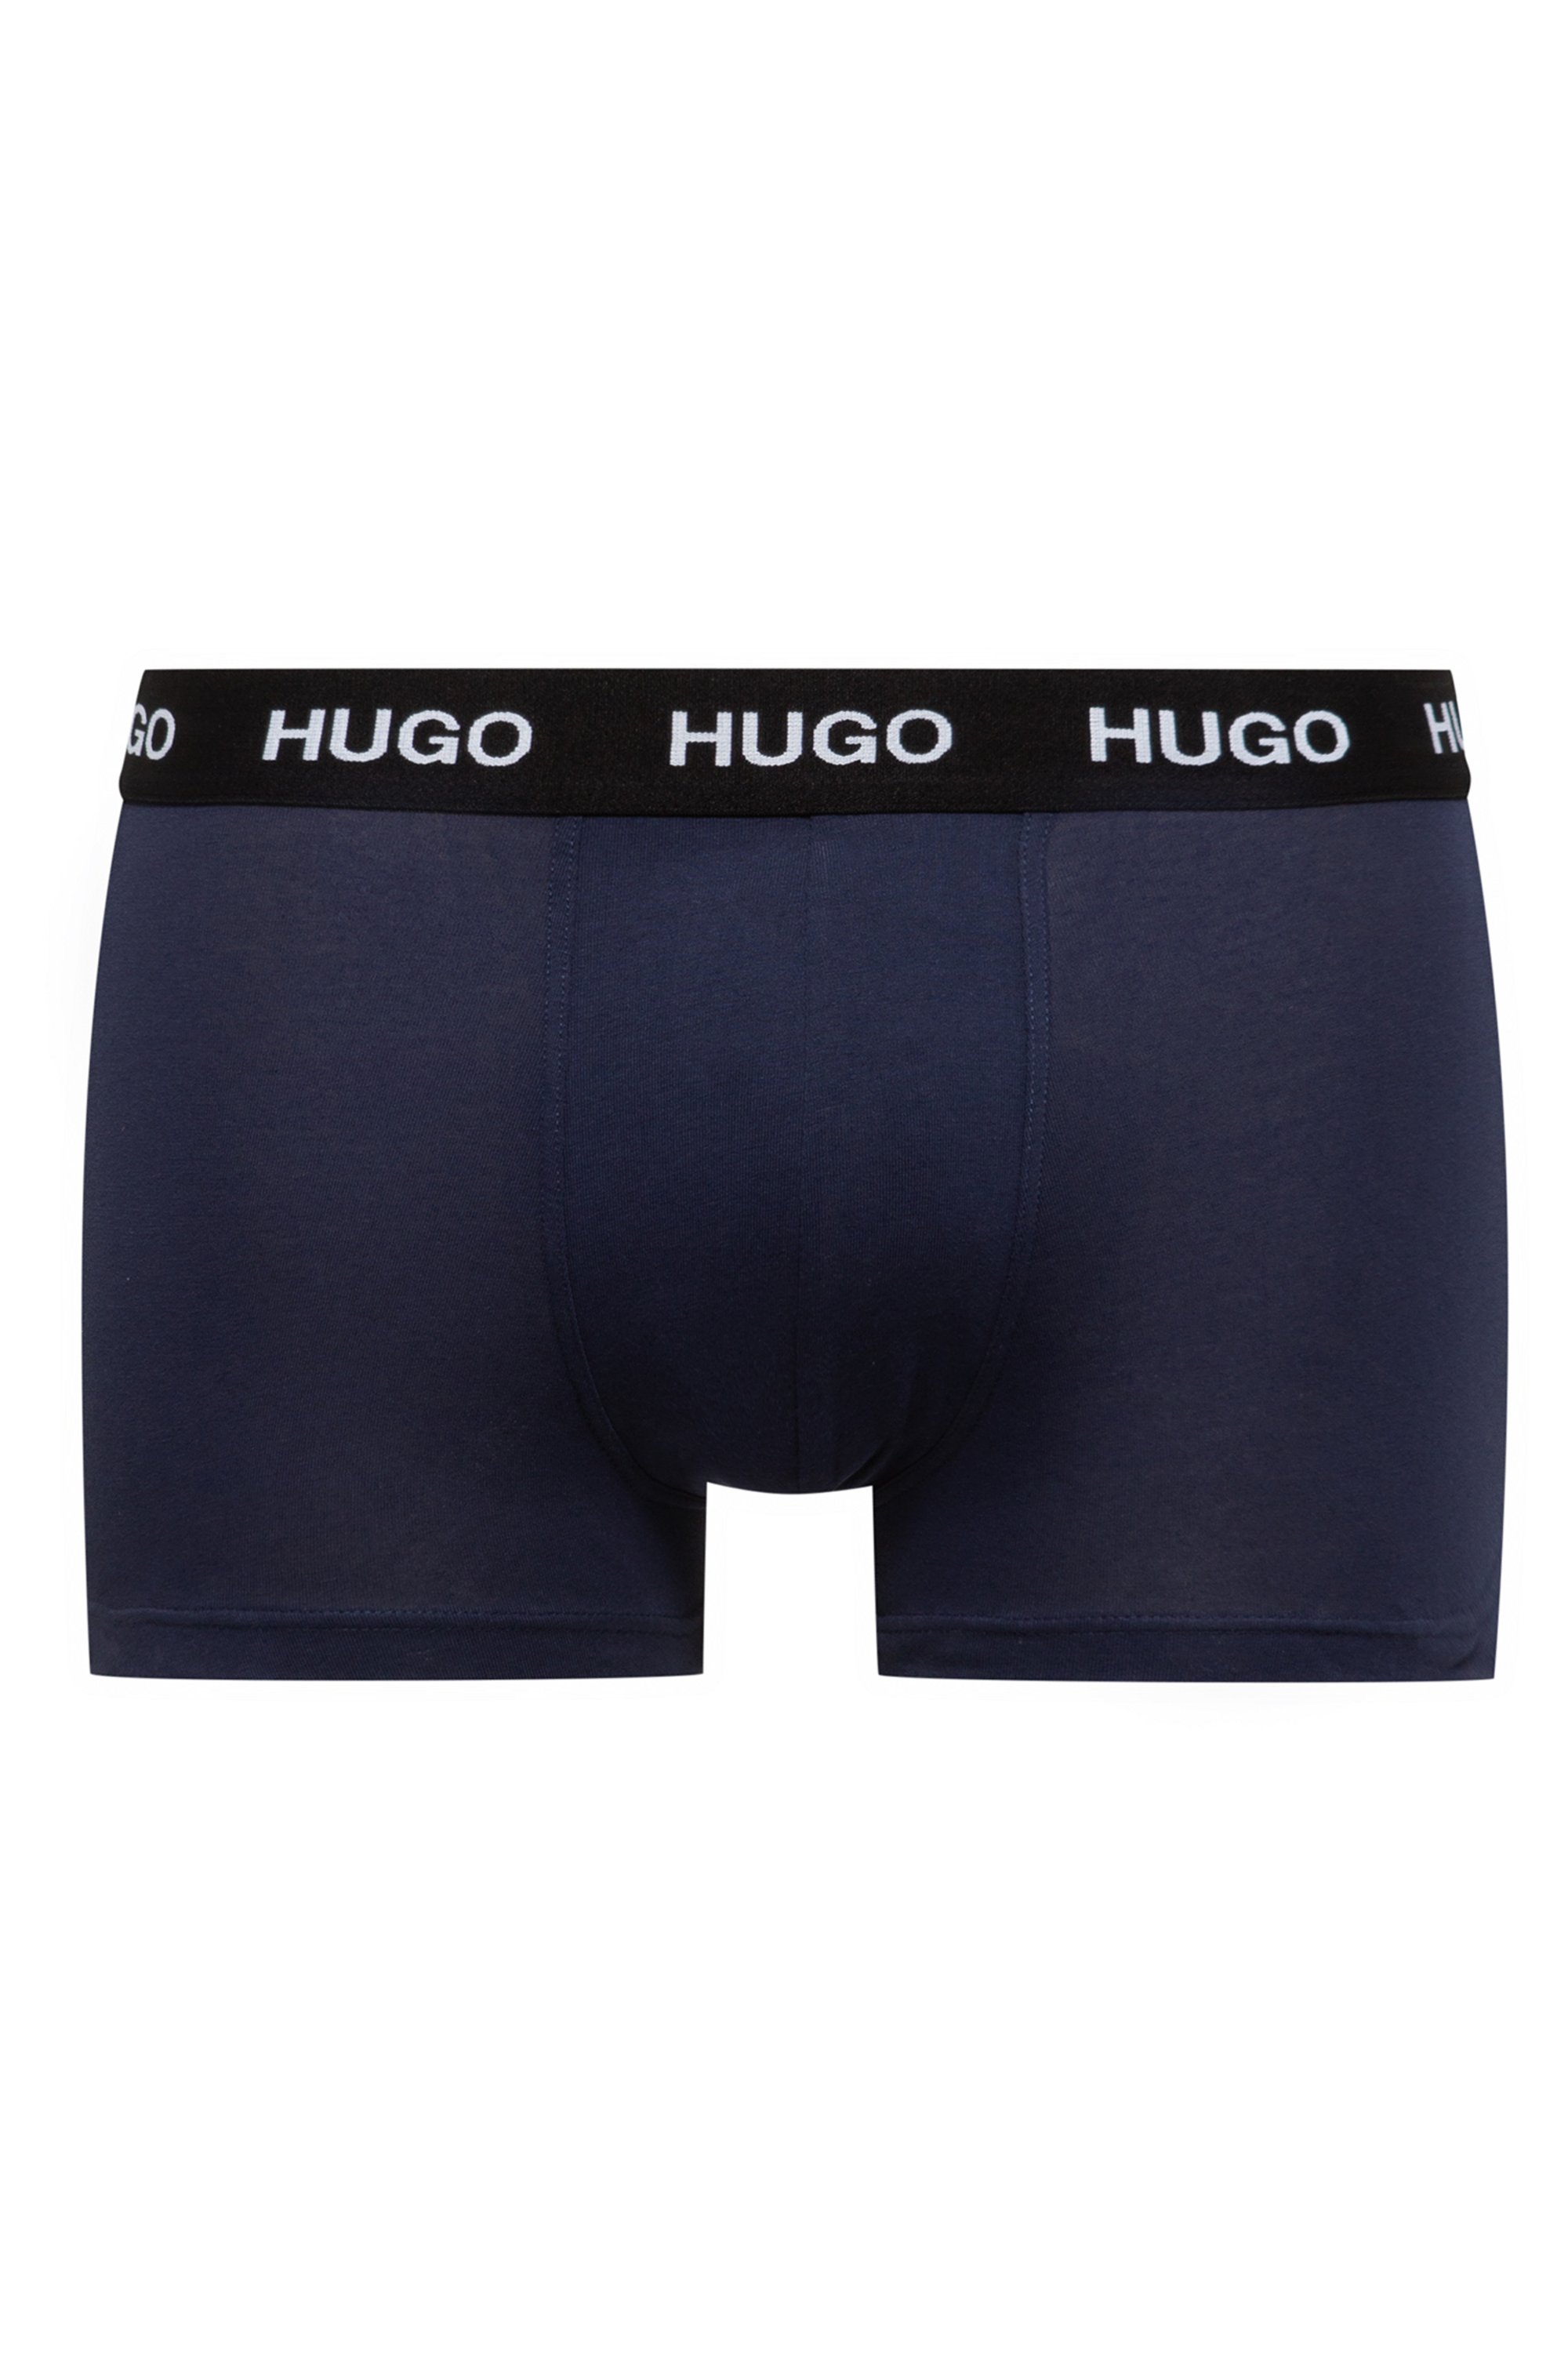 Three-pack of stretch-jersey trunks with logo waistbands, Dark Blue